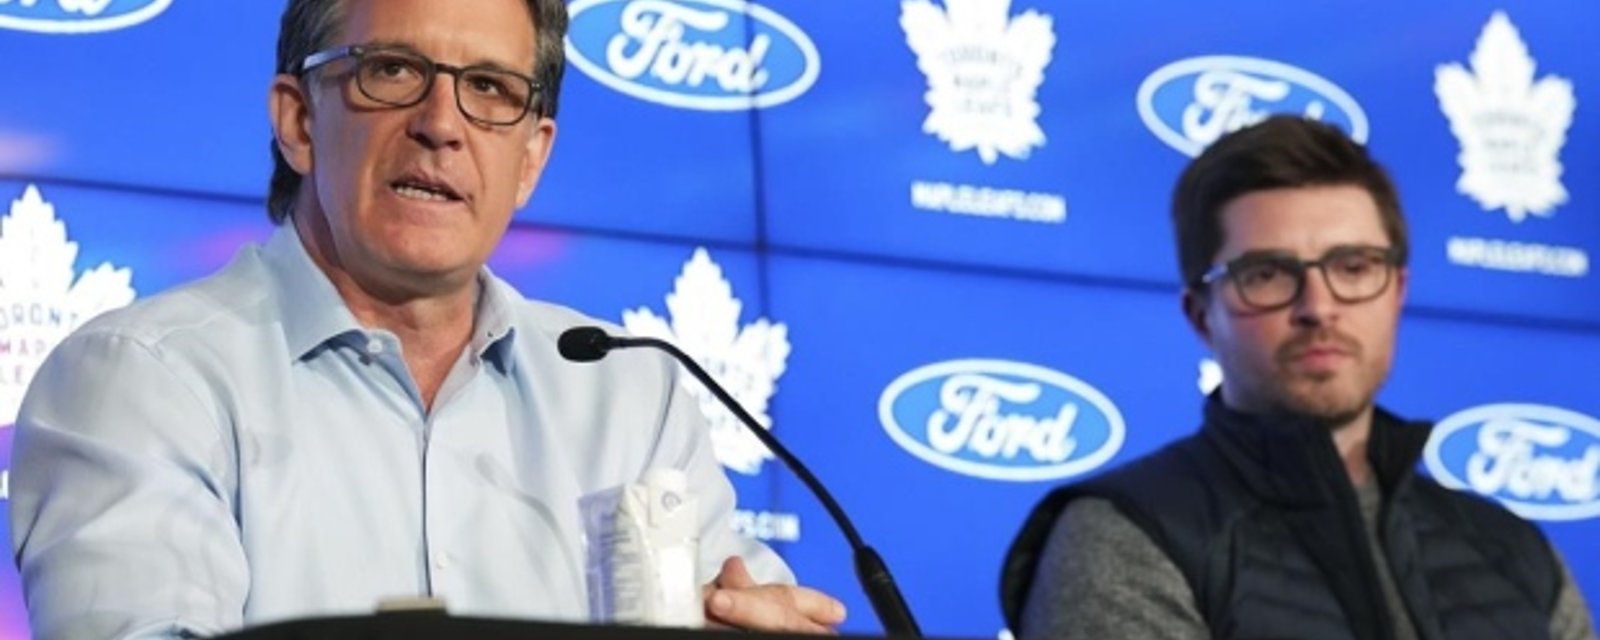 Maple Leafs members reportedly angered over major changes